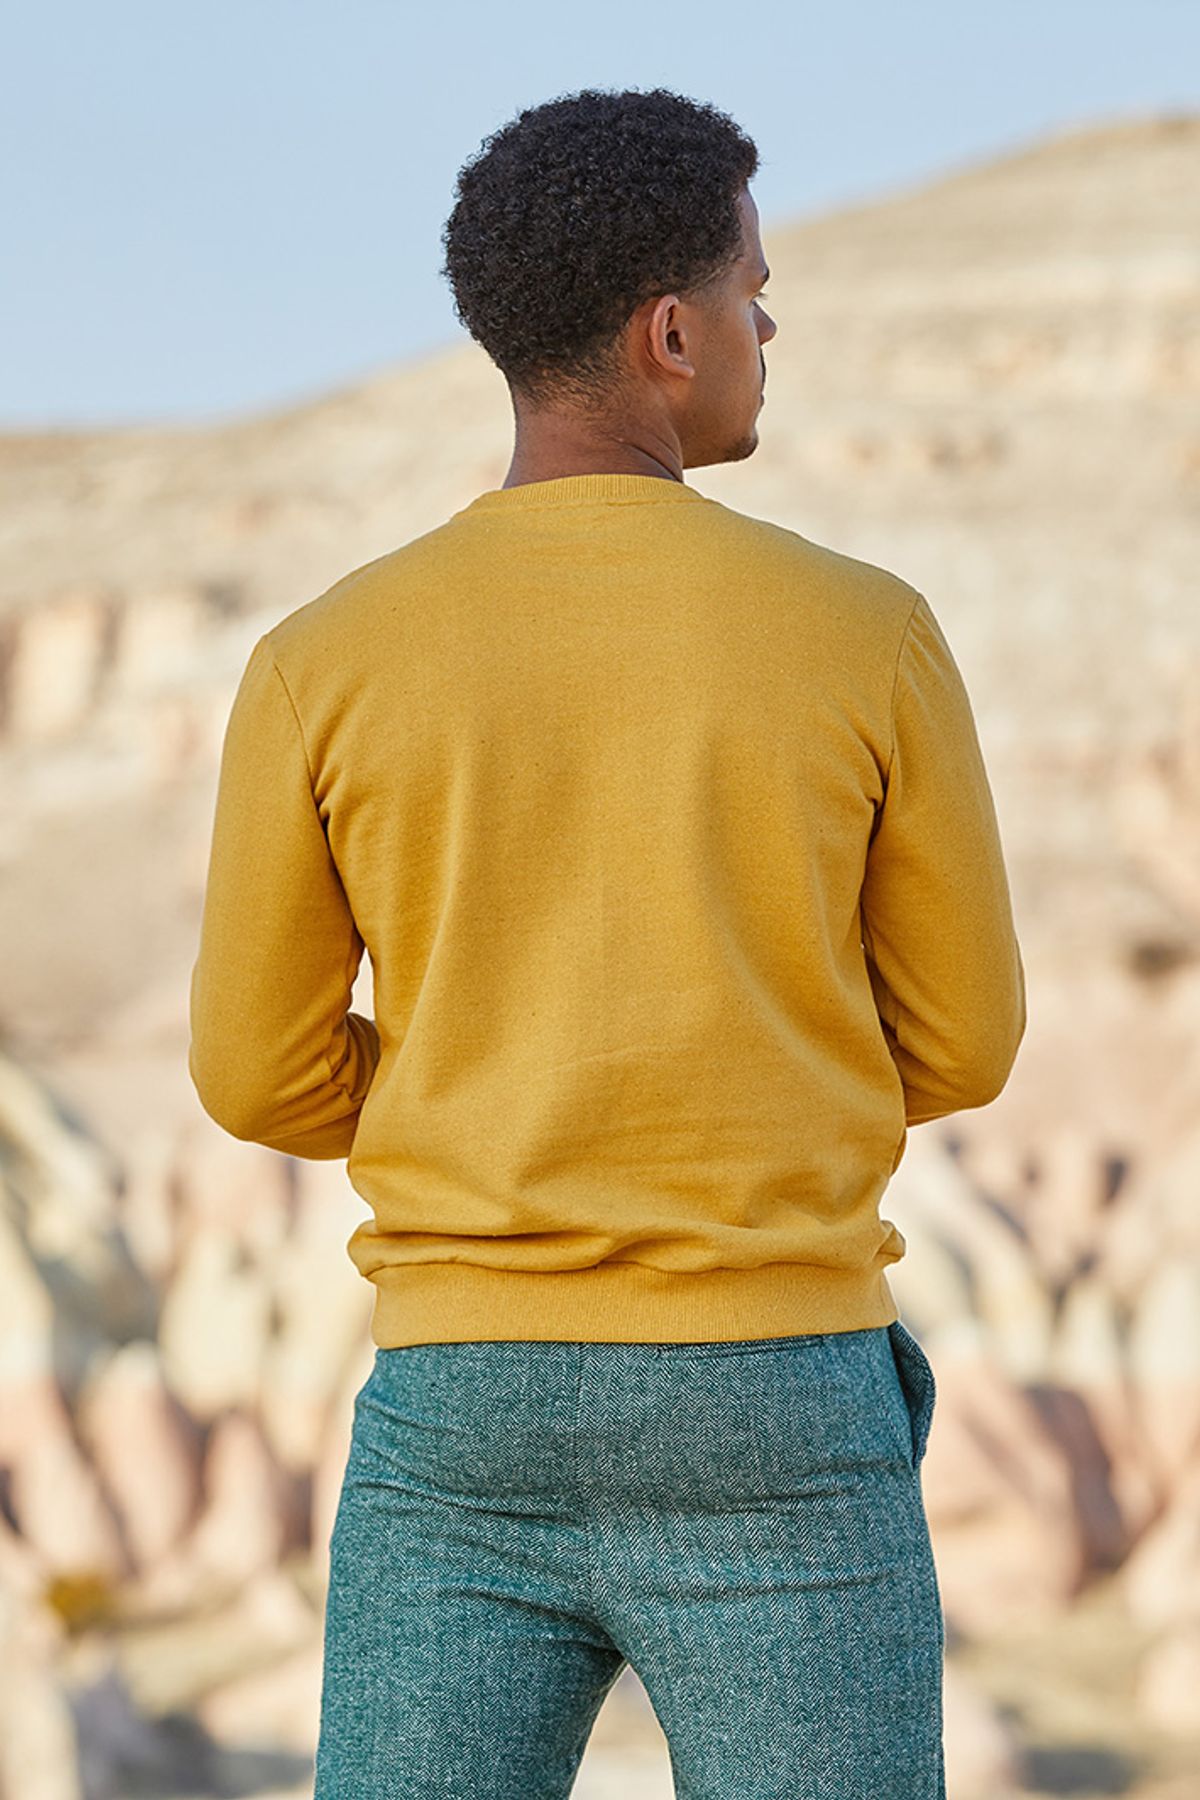 Pullover for Men with Clandestino Print Yellow